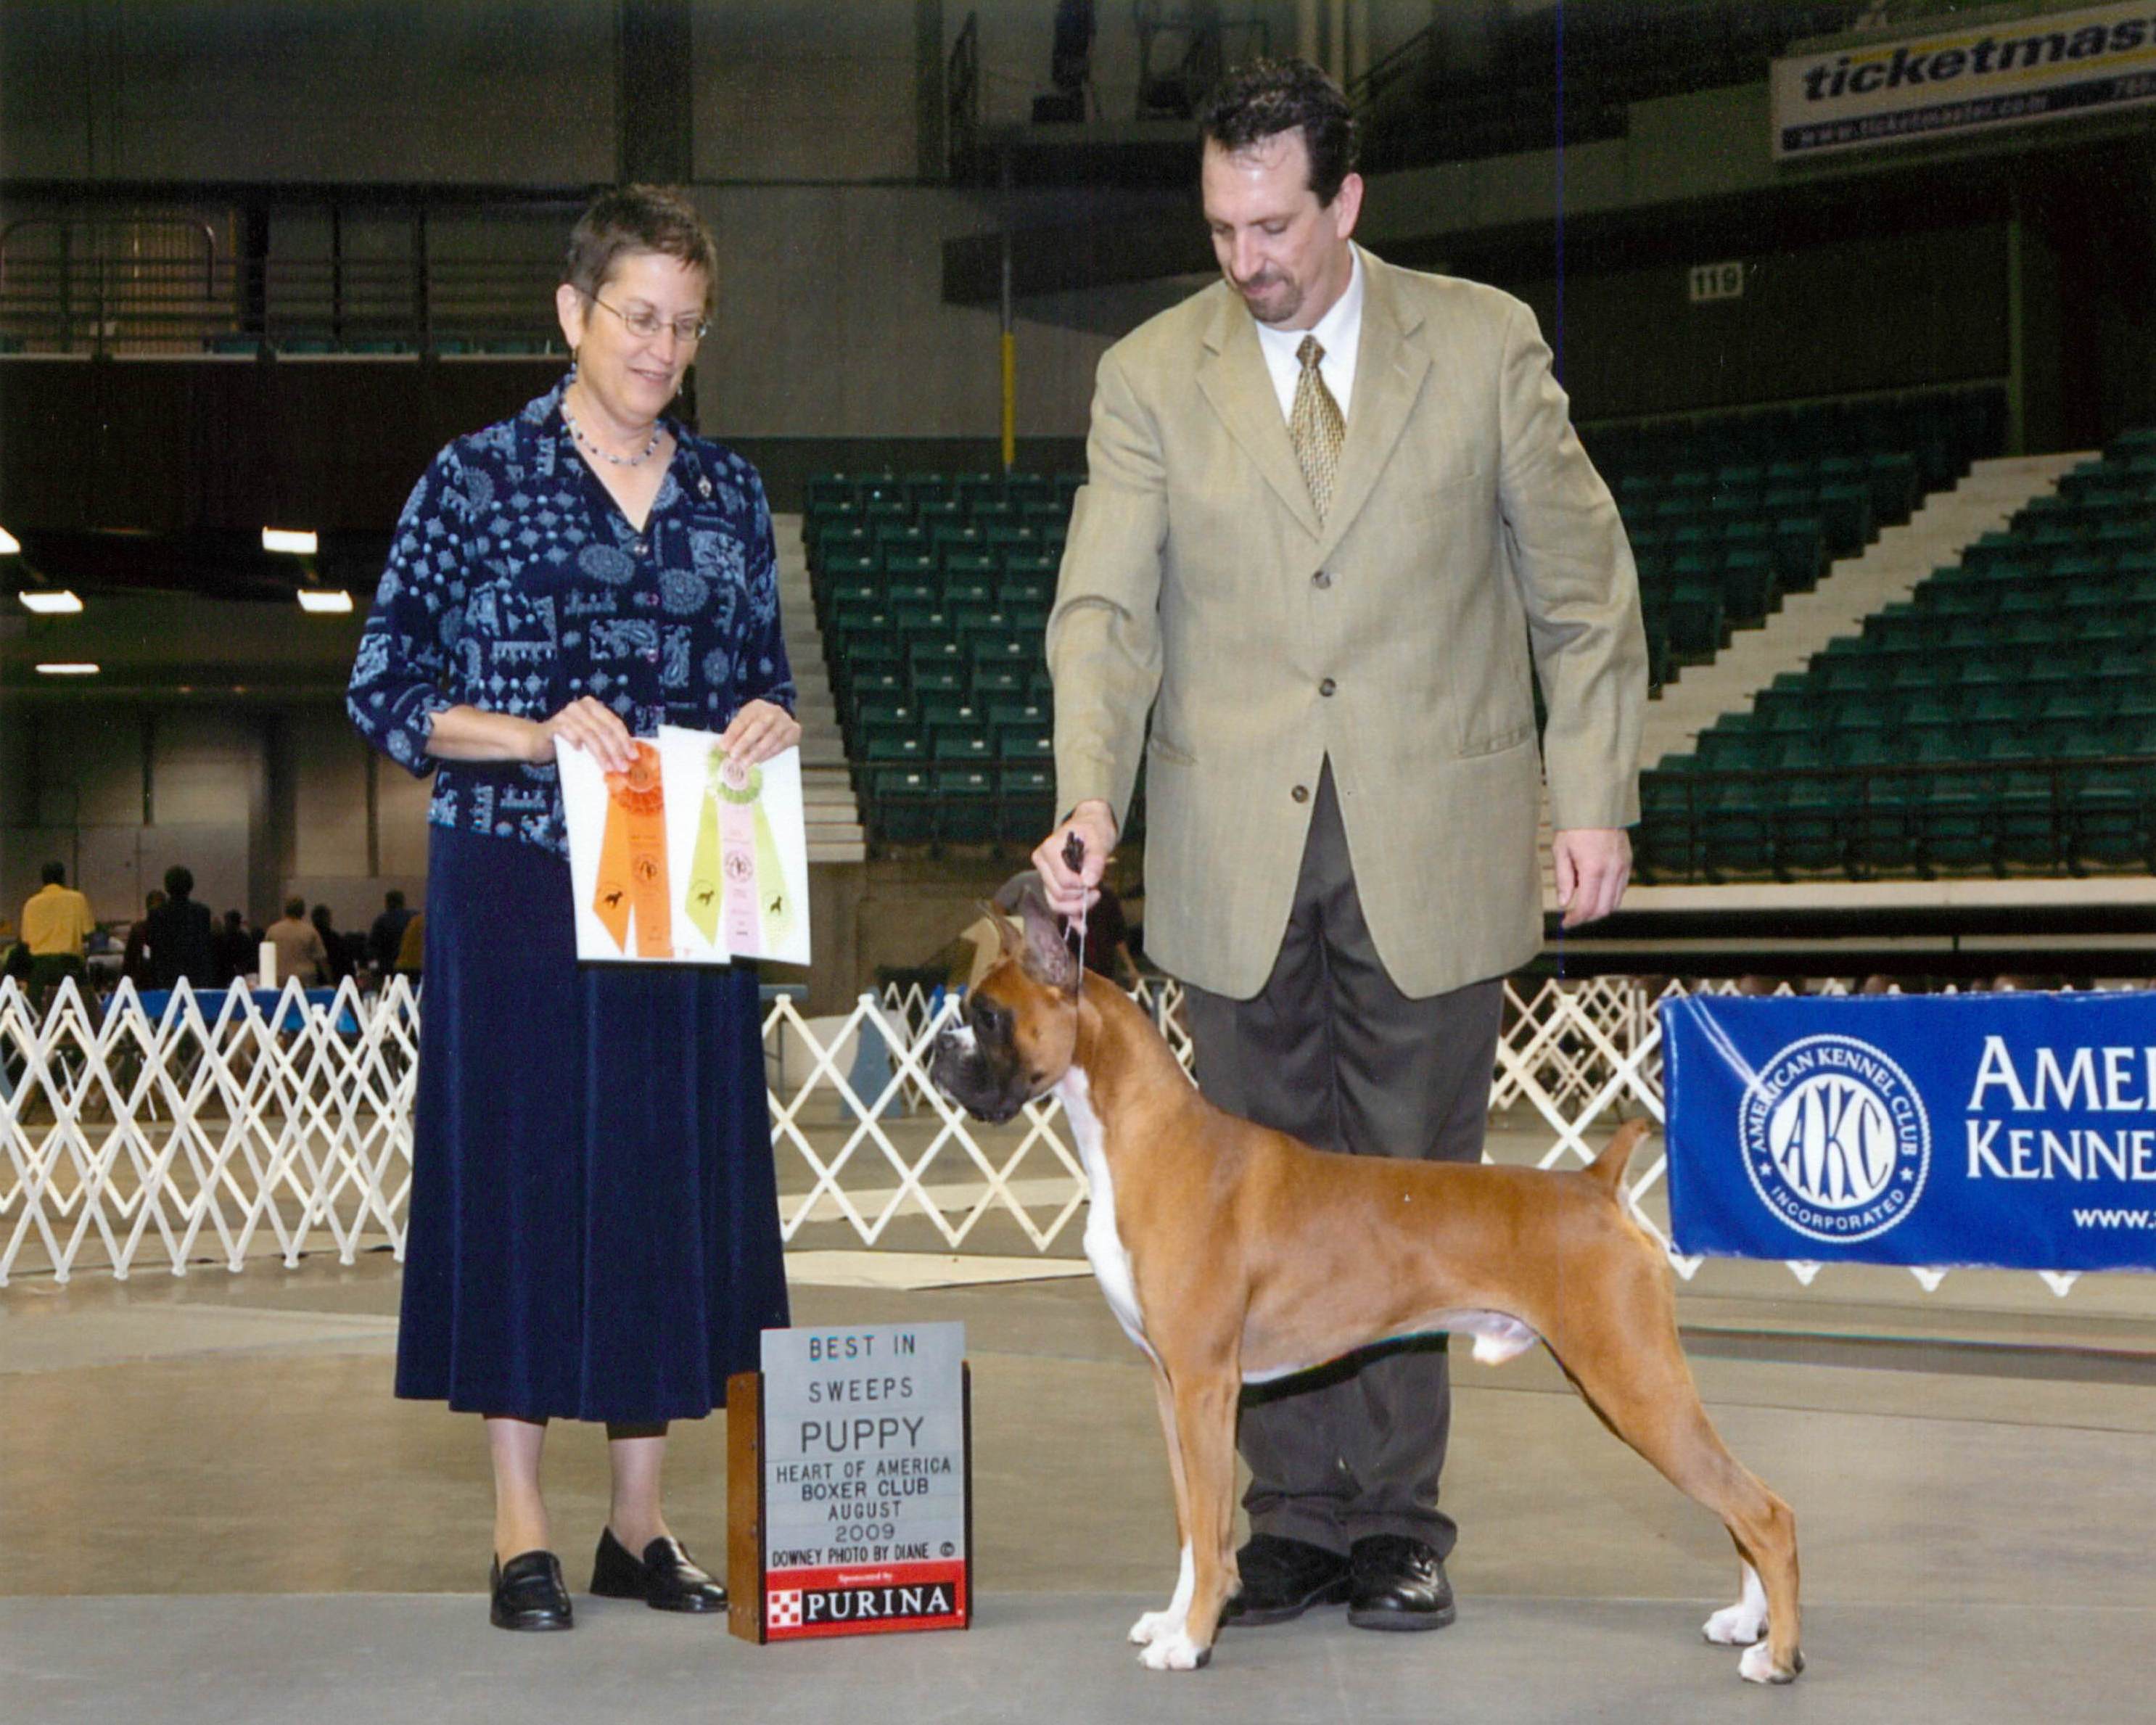 Grand Sweepstakes, Best Puppy @ 2009 Specialty Show #1